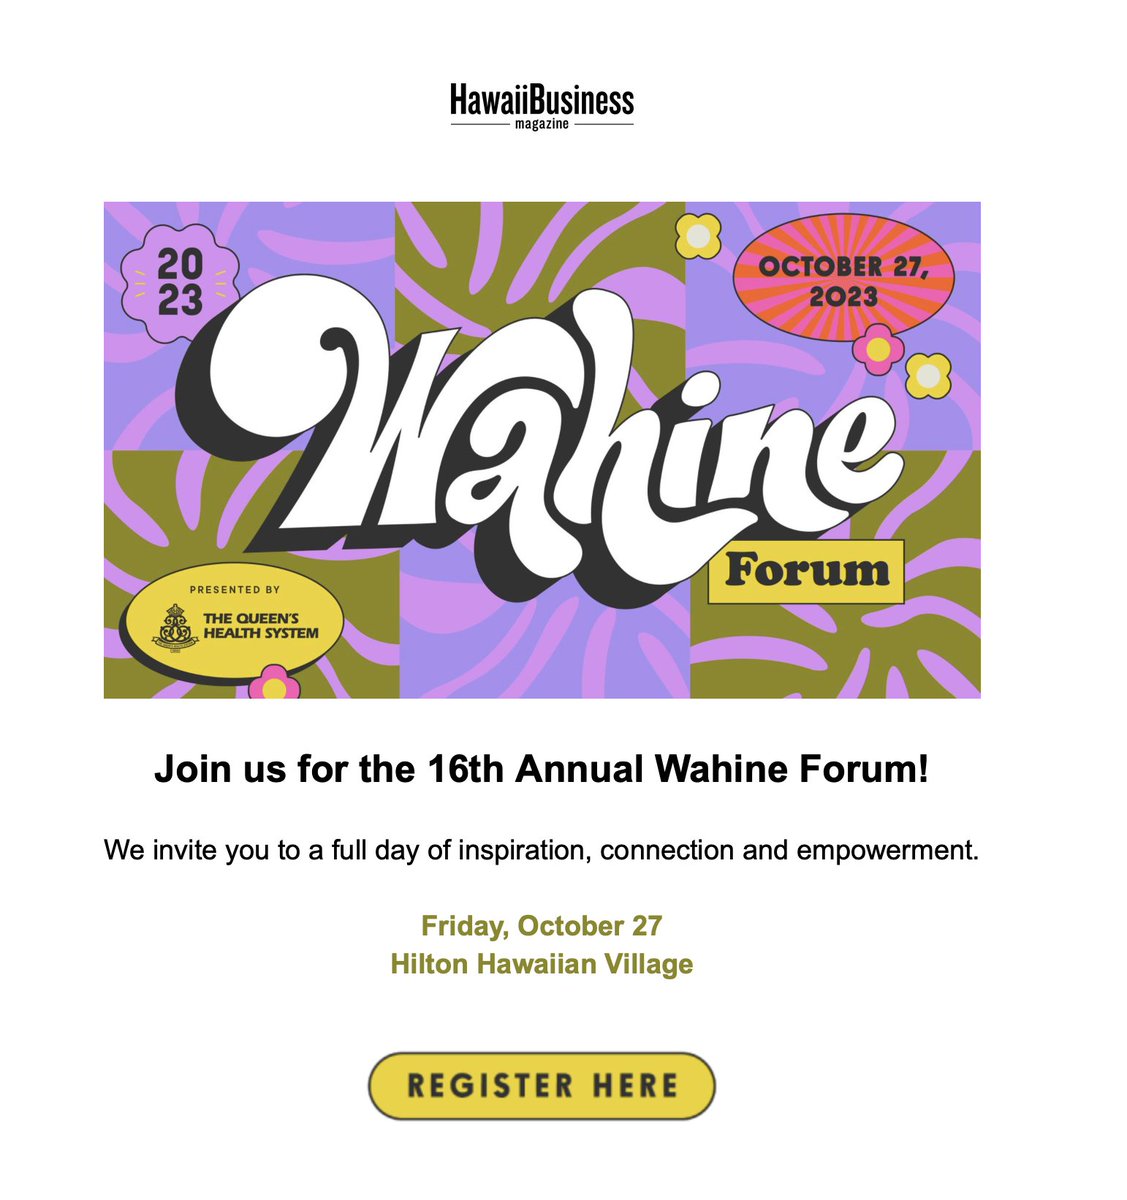 One of the best conferences you will ever attend, I swear to you. Register at hawaiibusiness.com. @hawaiibusiness #WahineForum #ManaWahine #808Educate